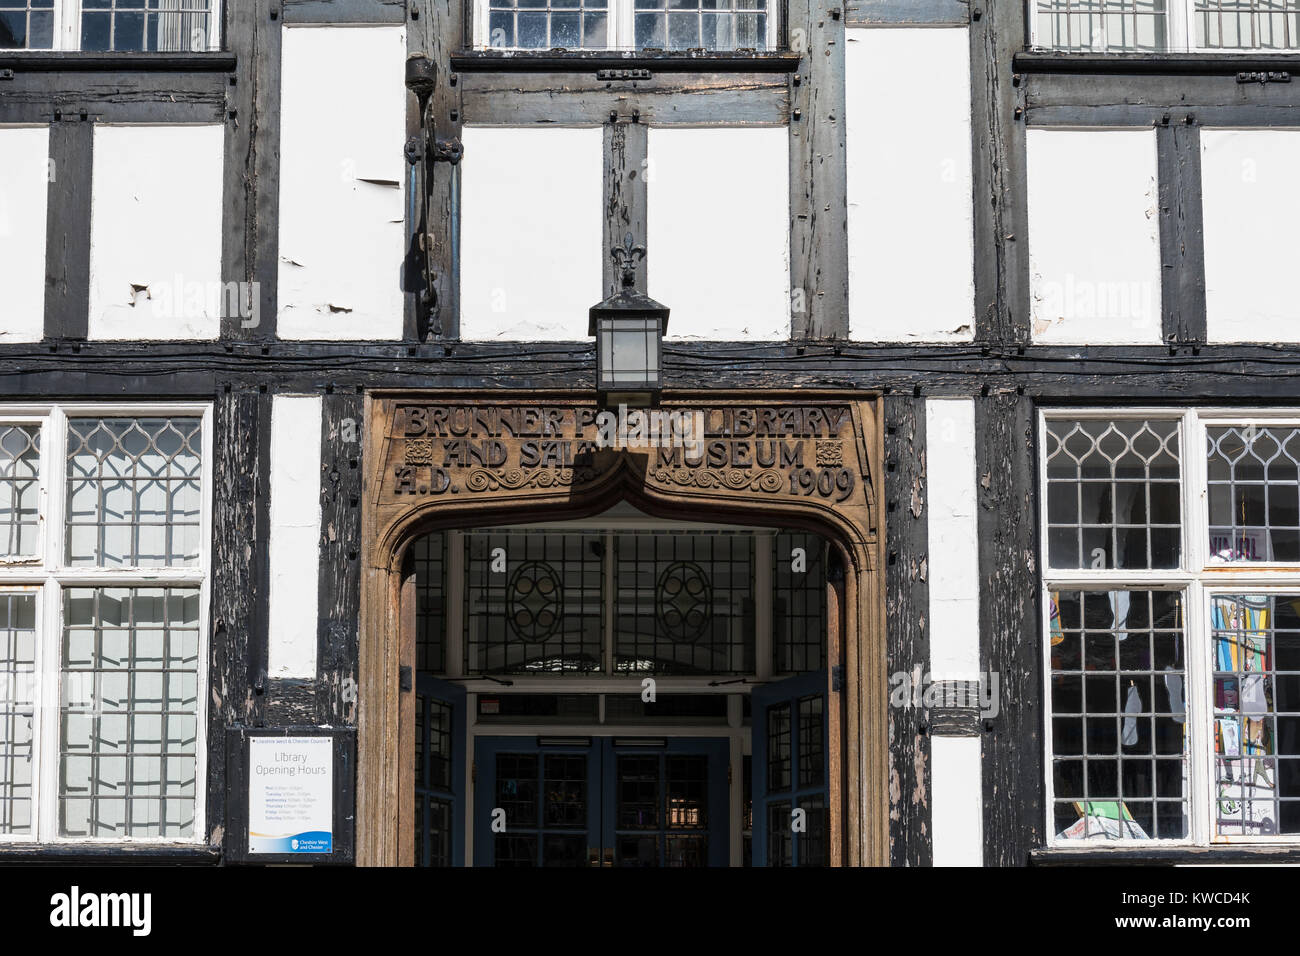 Entrance of Brunner public library and salt museum in Northwich, Cheshire, UK Stock Photo